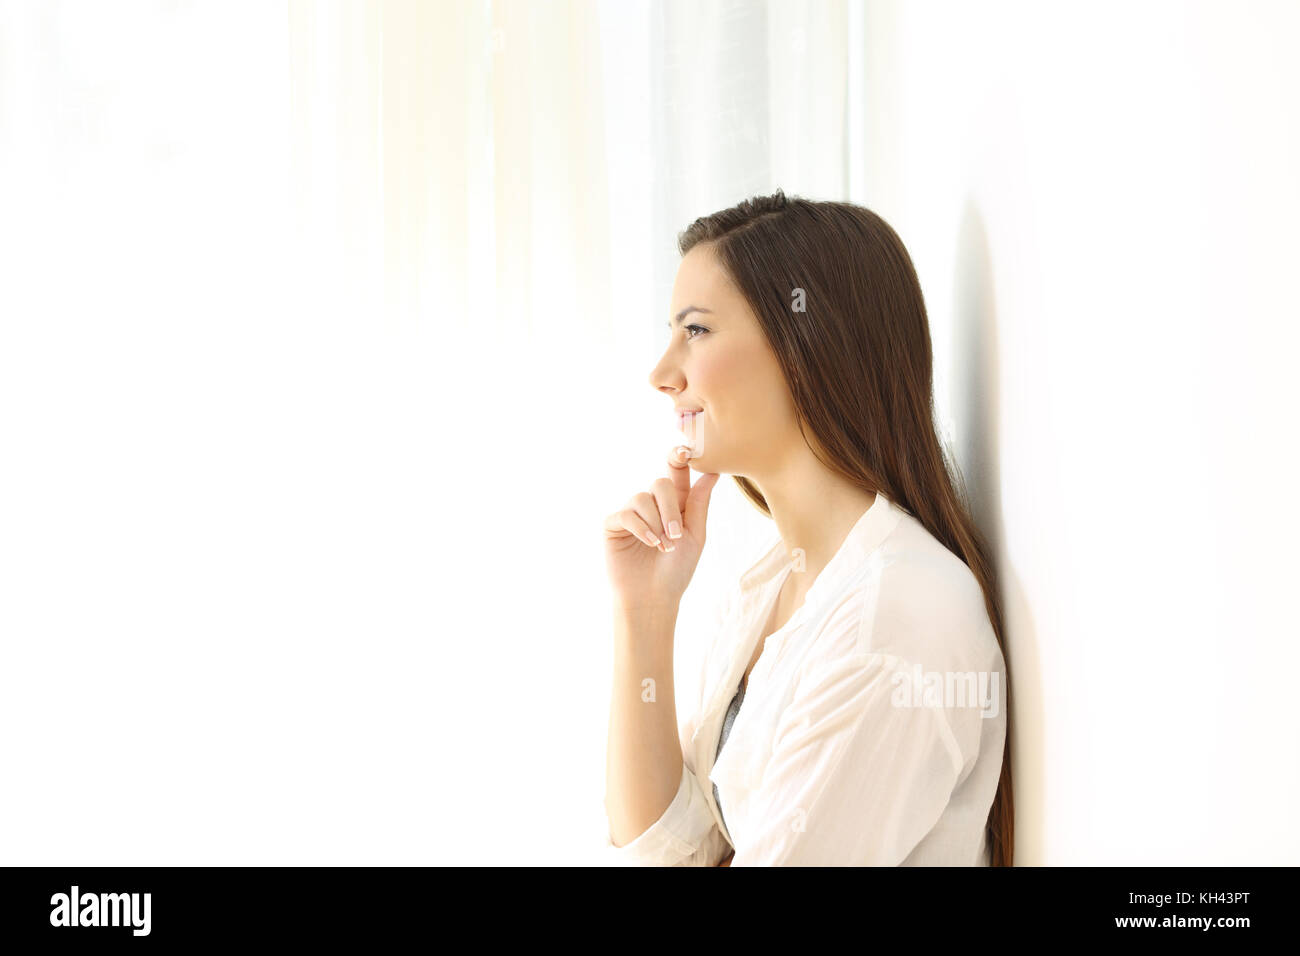 Side view portrait of a woman thinking leaning on a wall at home isolated on white at side Stock Photo